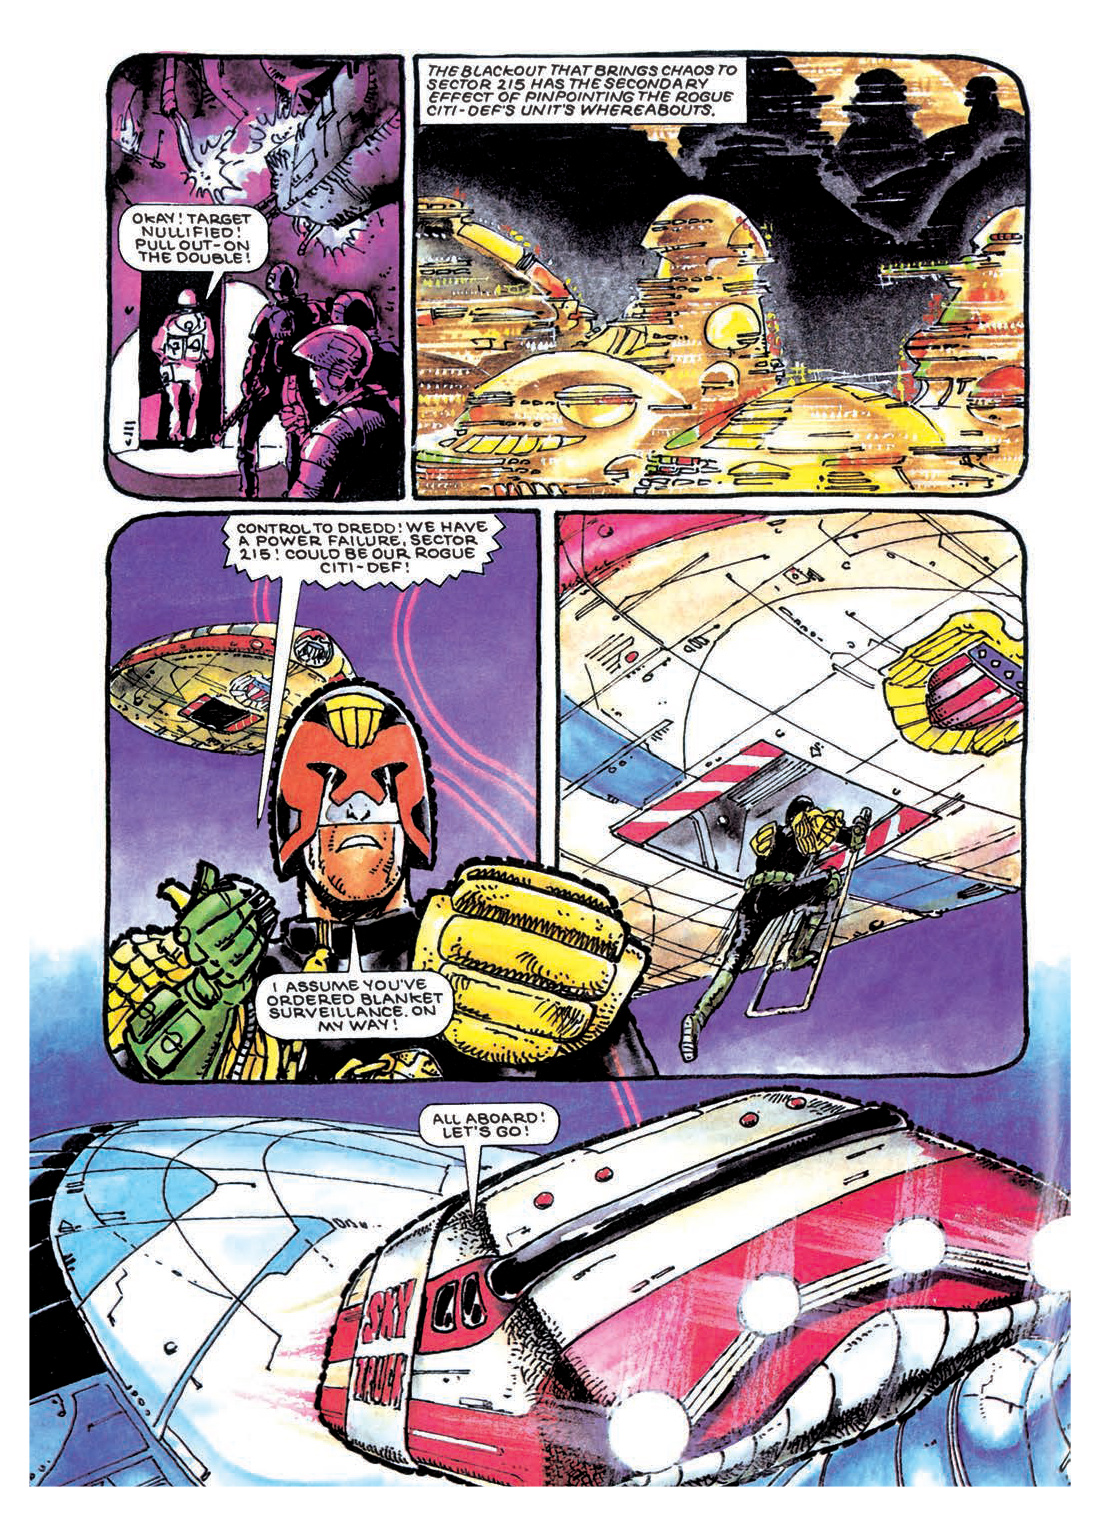 Read online Judge Dredd: The Restricted Files comic -  Issue # TPB 2 - 41